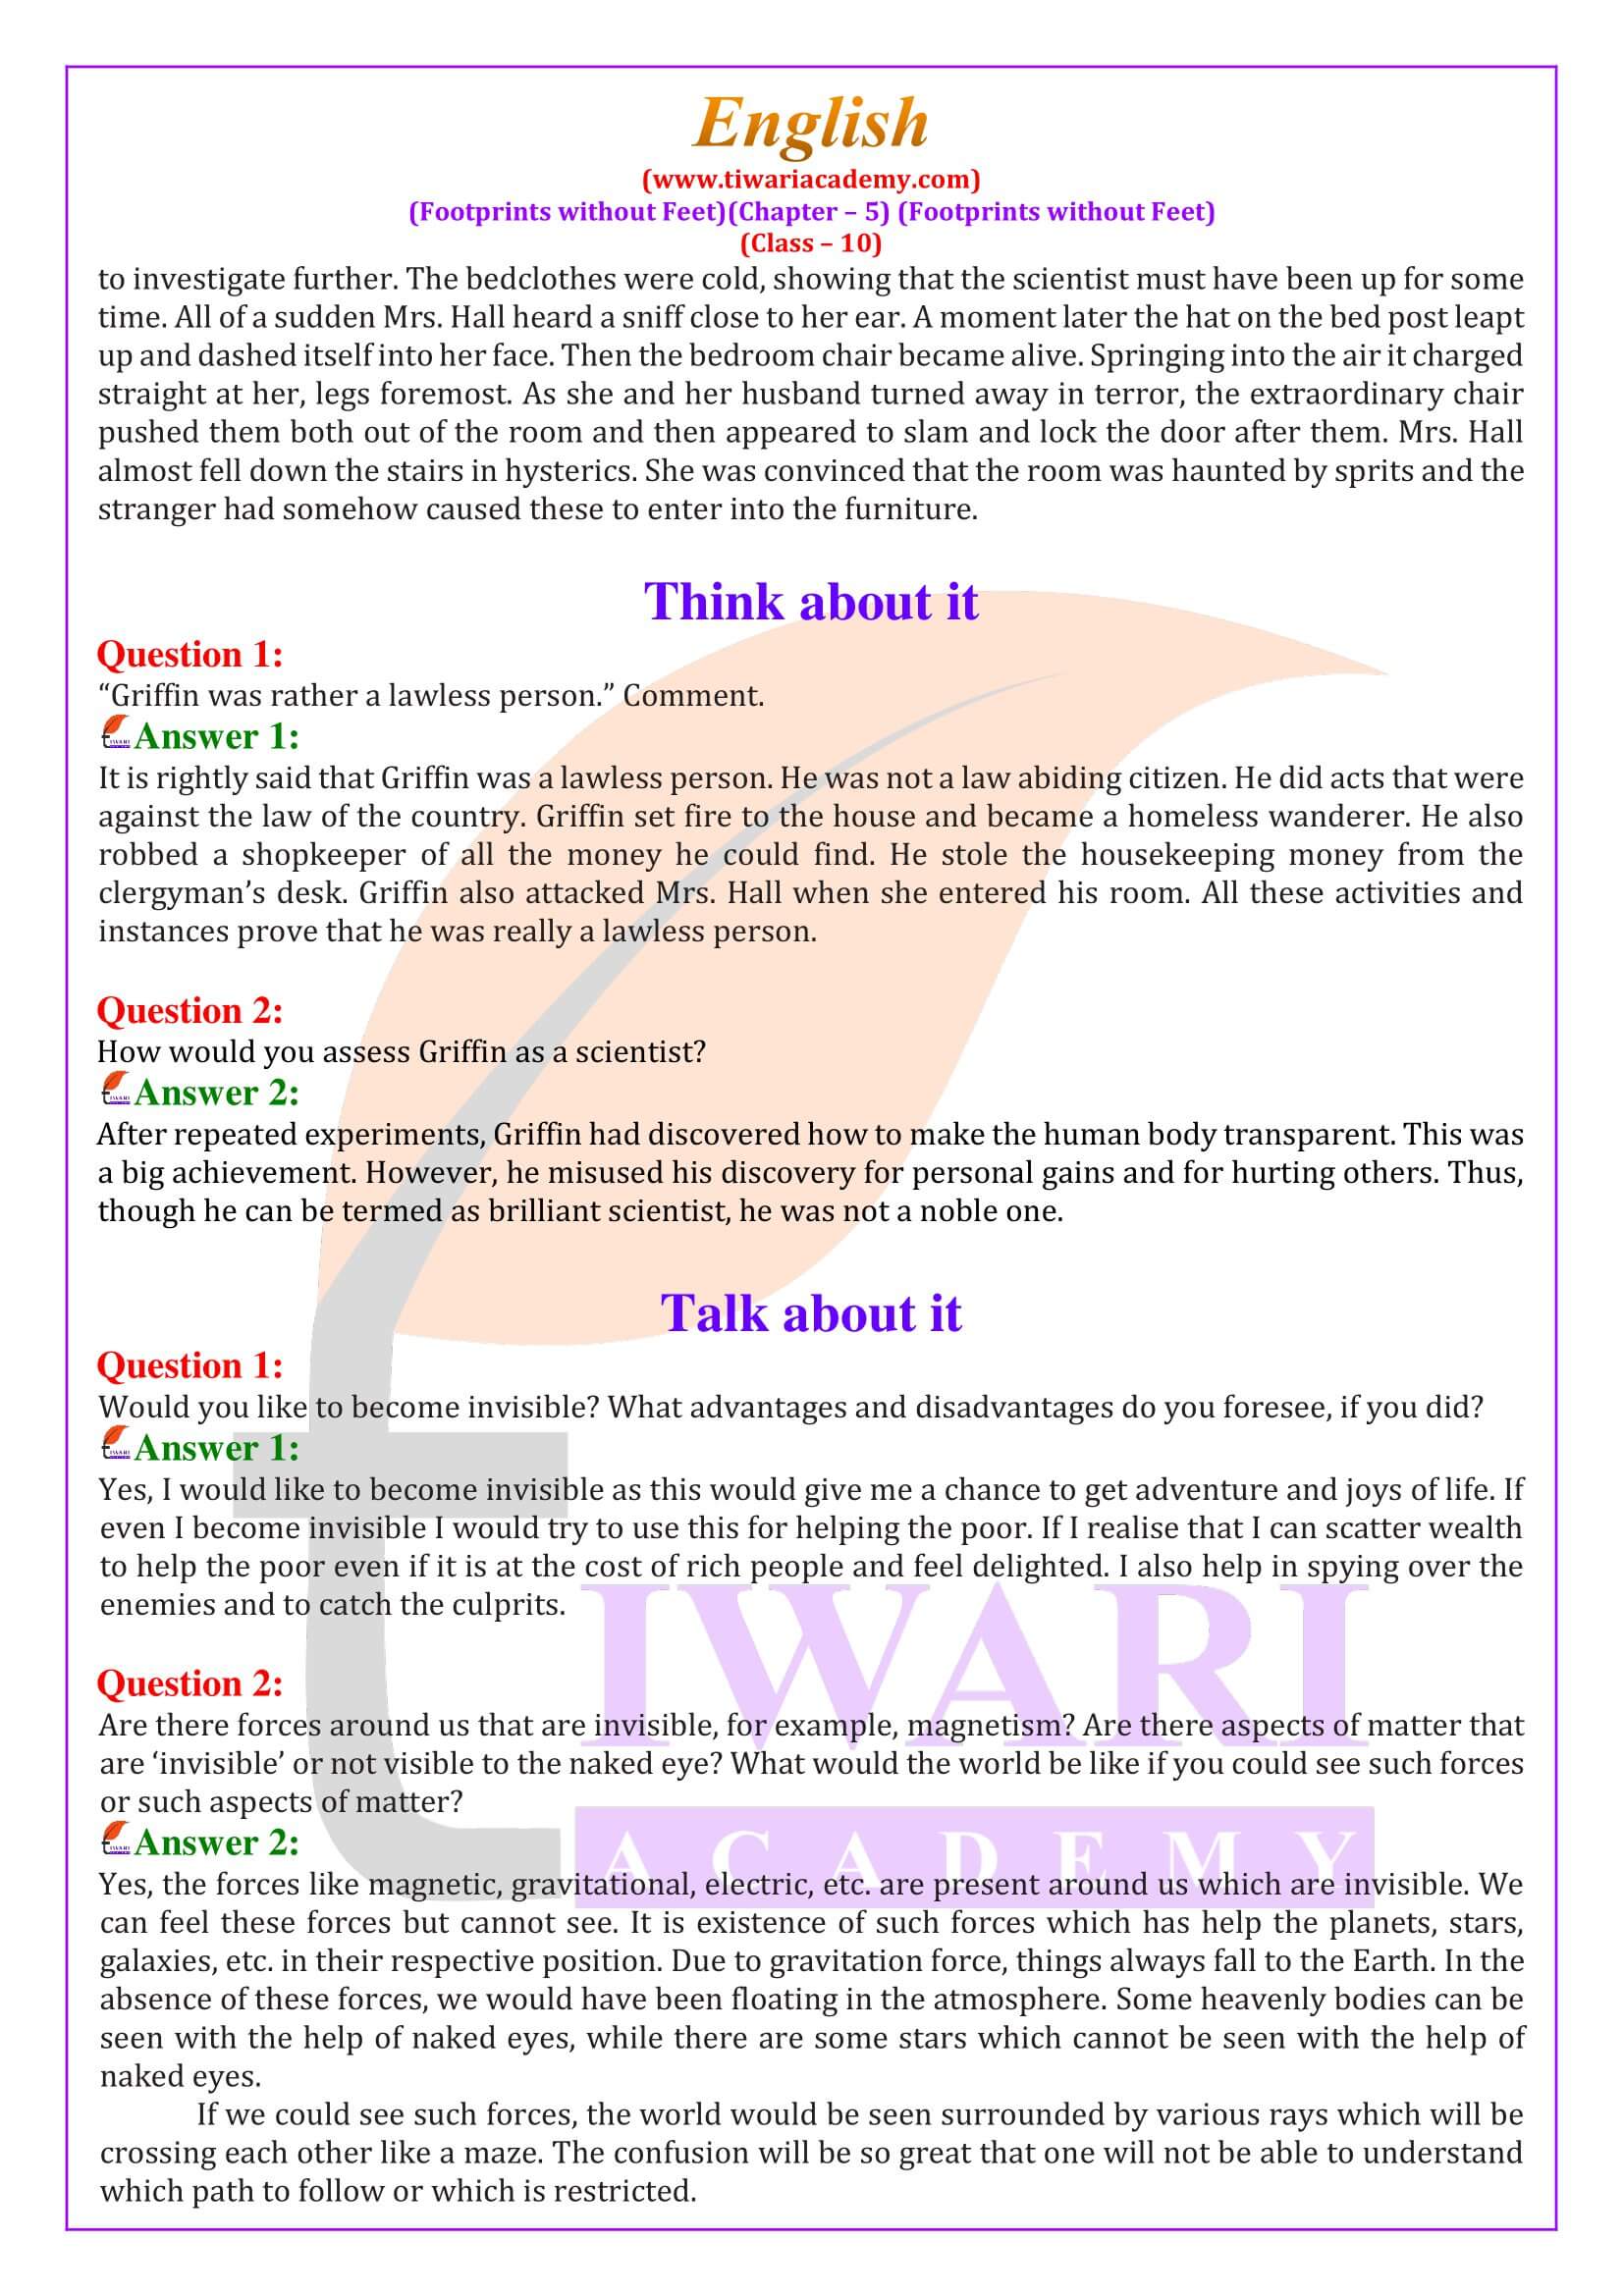 NCERT Solutions for Class 10 English Chapter 5